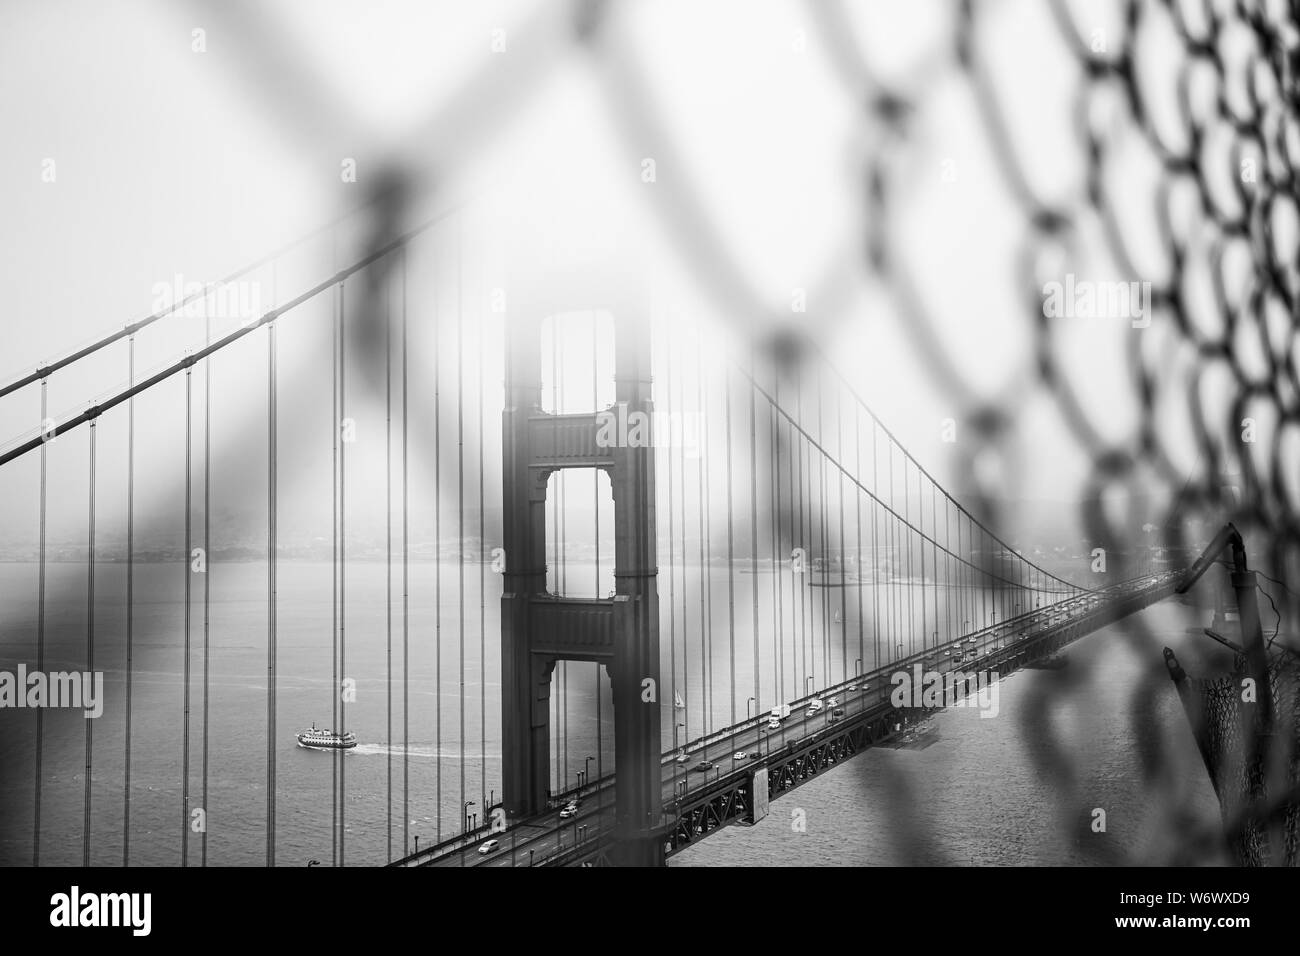 The Golden Gate Bridge, San Francisco, viewed through a wire fence on Marin Headlands in Black and White. Stock Photo